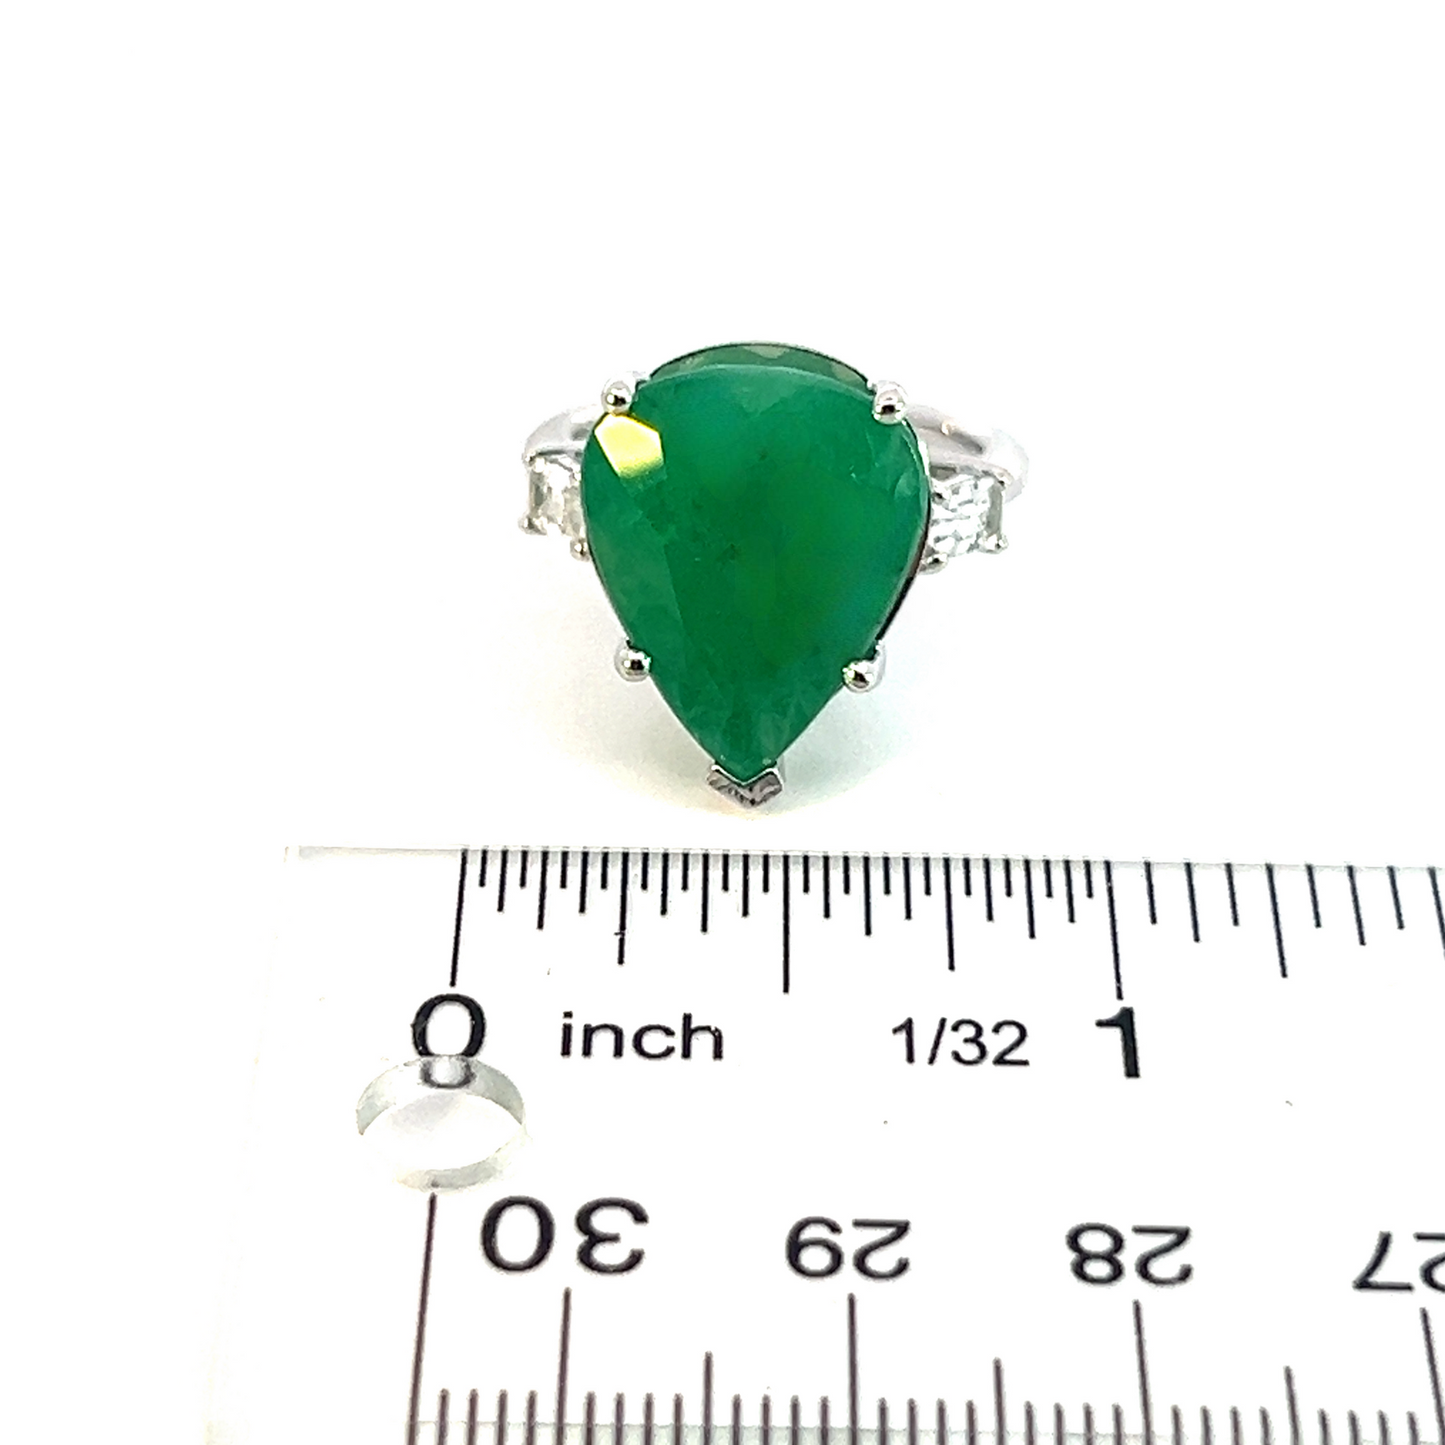 Natural Emerald Diamond Ring 7 14k White Gold 10.97 TCW Certified $4,950 311003 - Certified Fine Jewelry